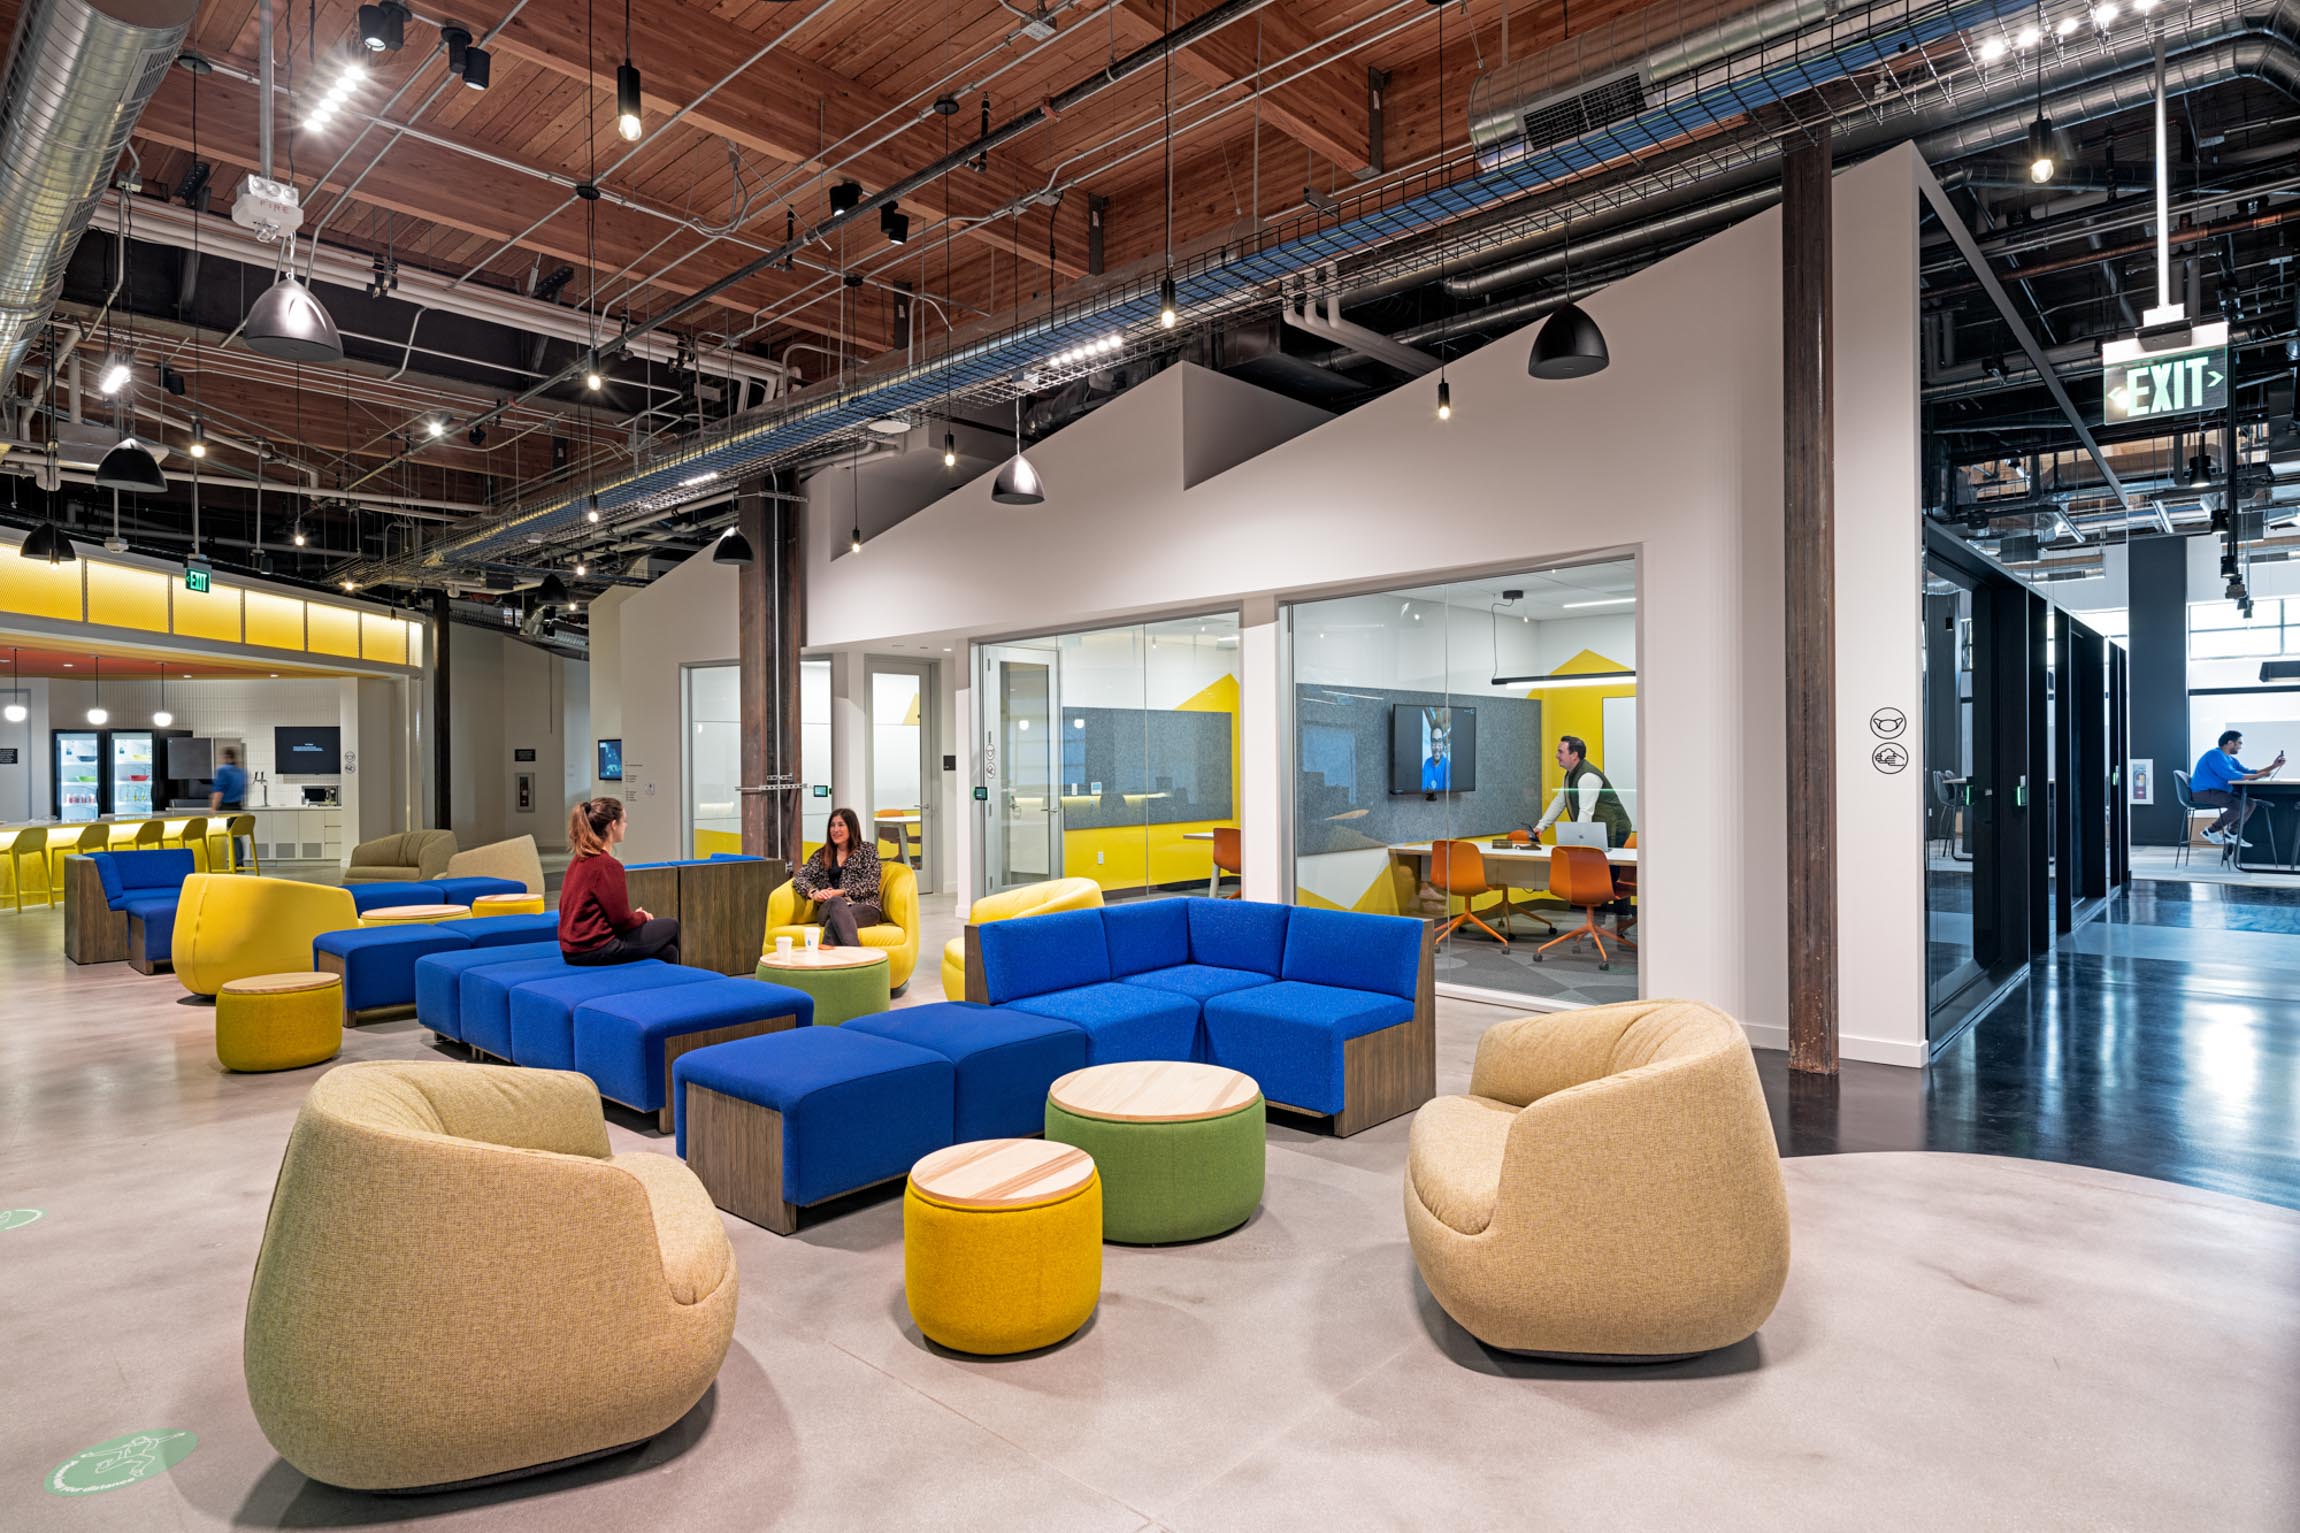 Lounge spaces outside of conference rooms with comfortable and colorful couches